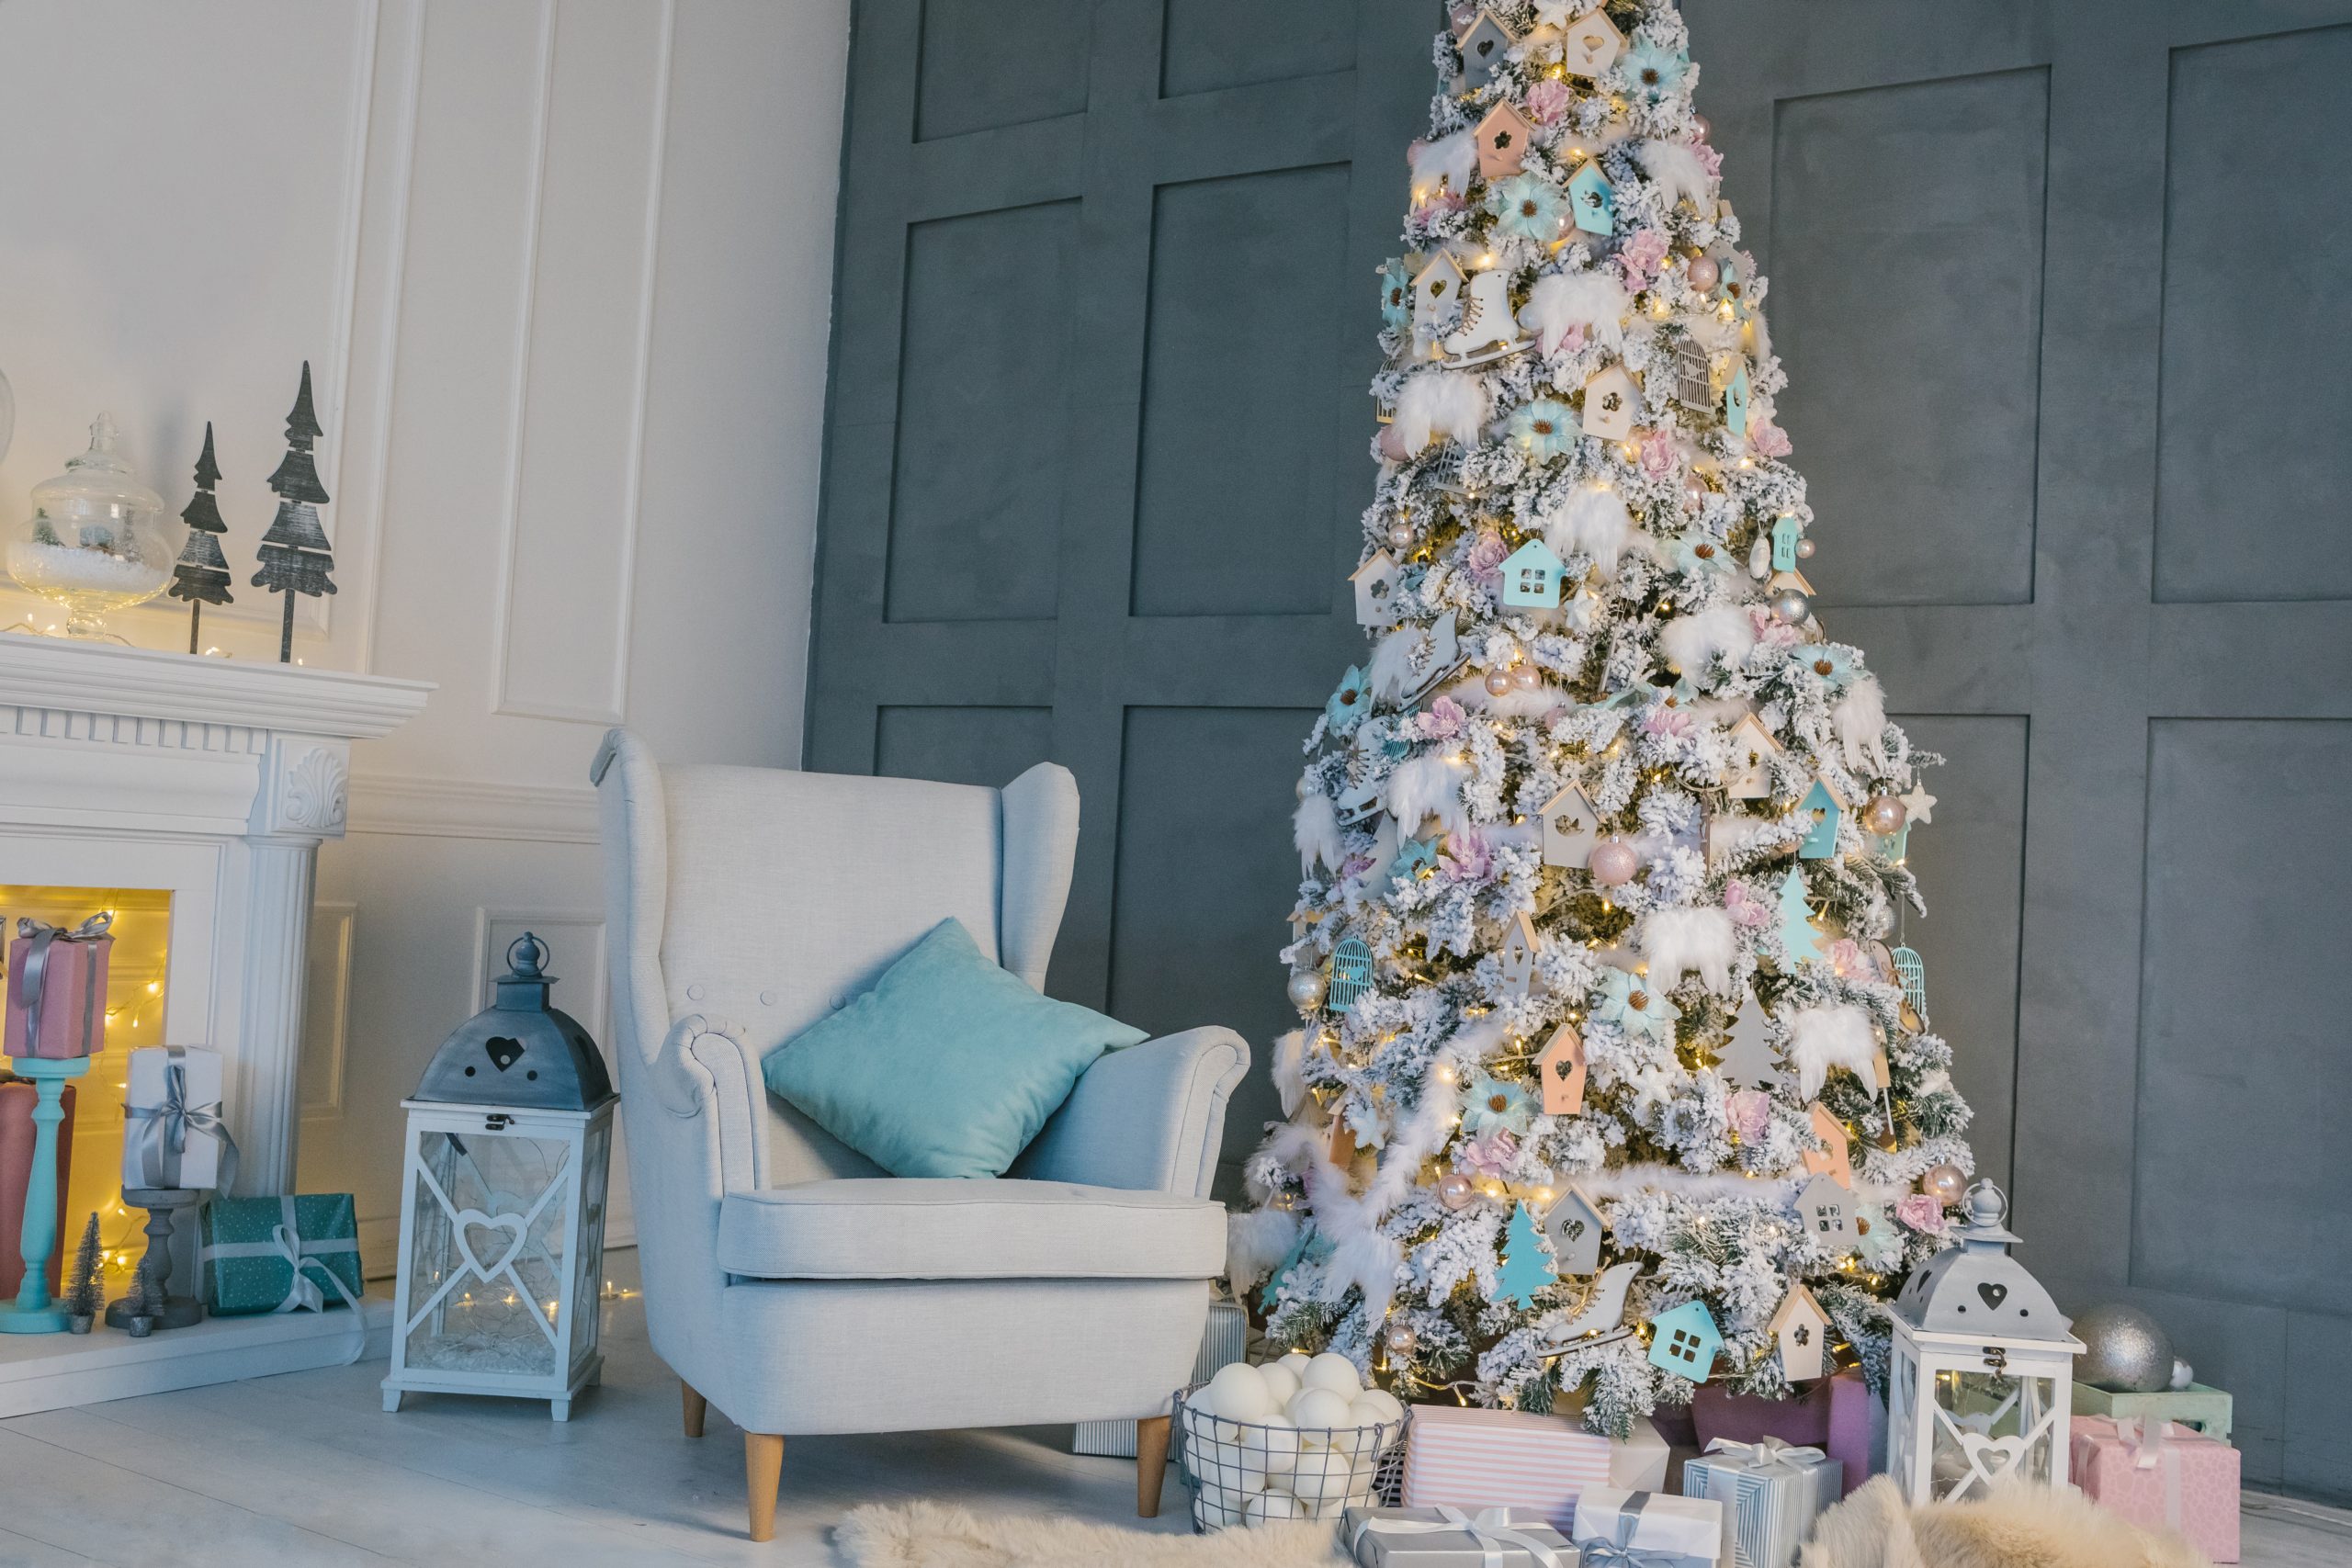 Get Into The Festive Spirit With Beautiful Indoor Decorations!